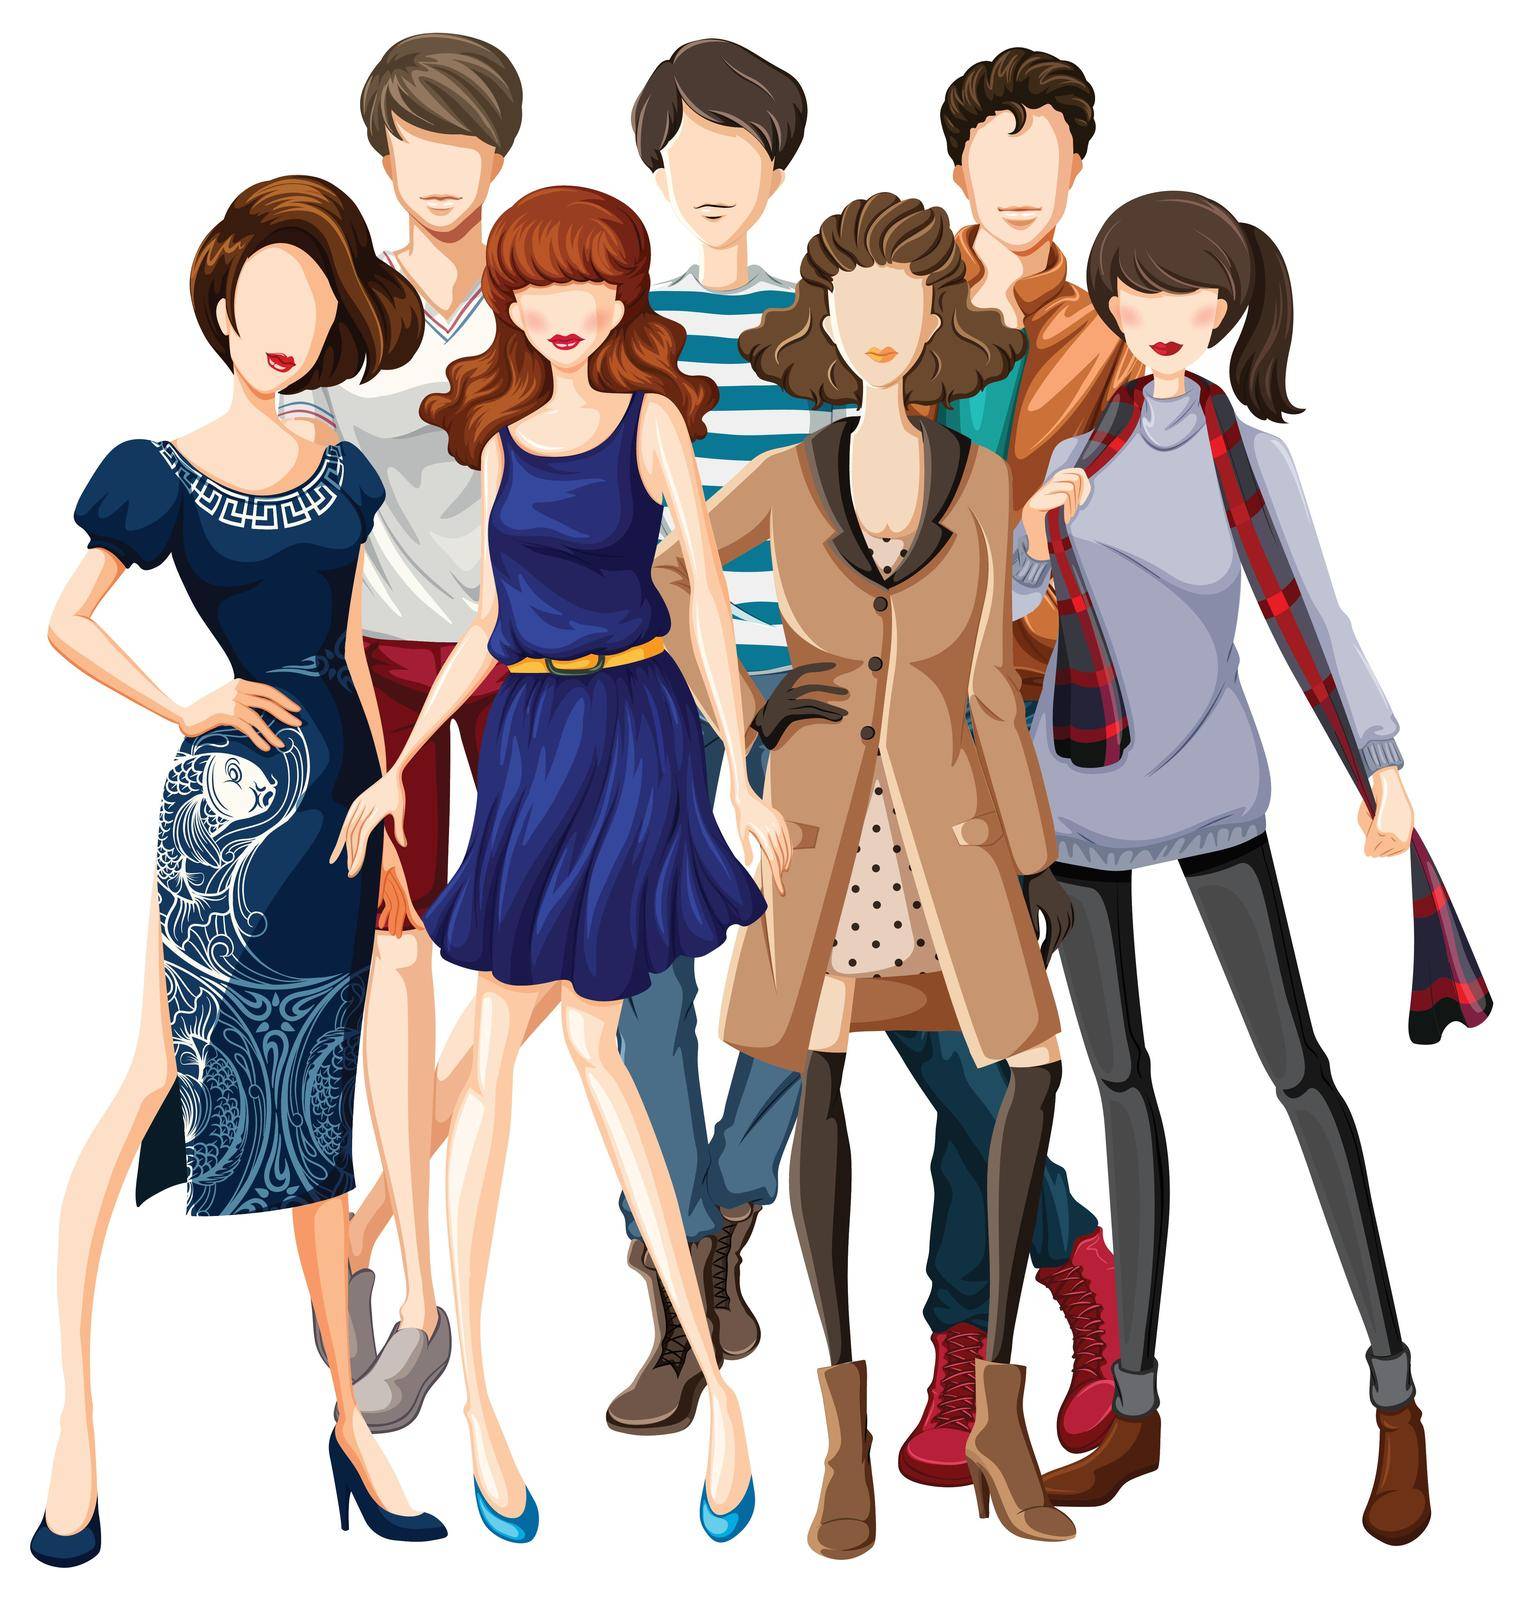 Male and female models wearing fashionable clothes